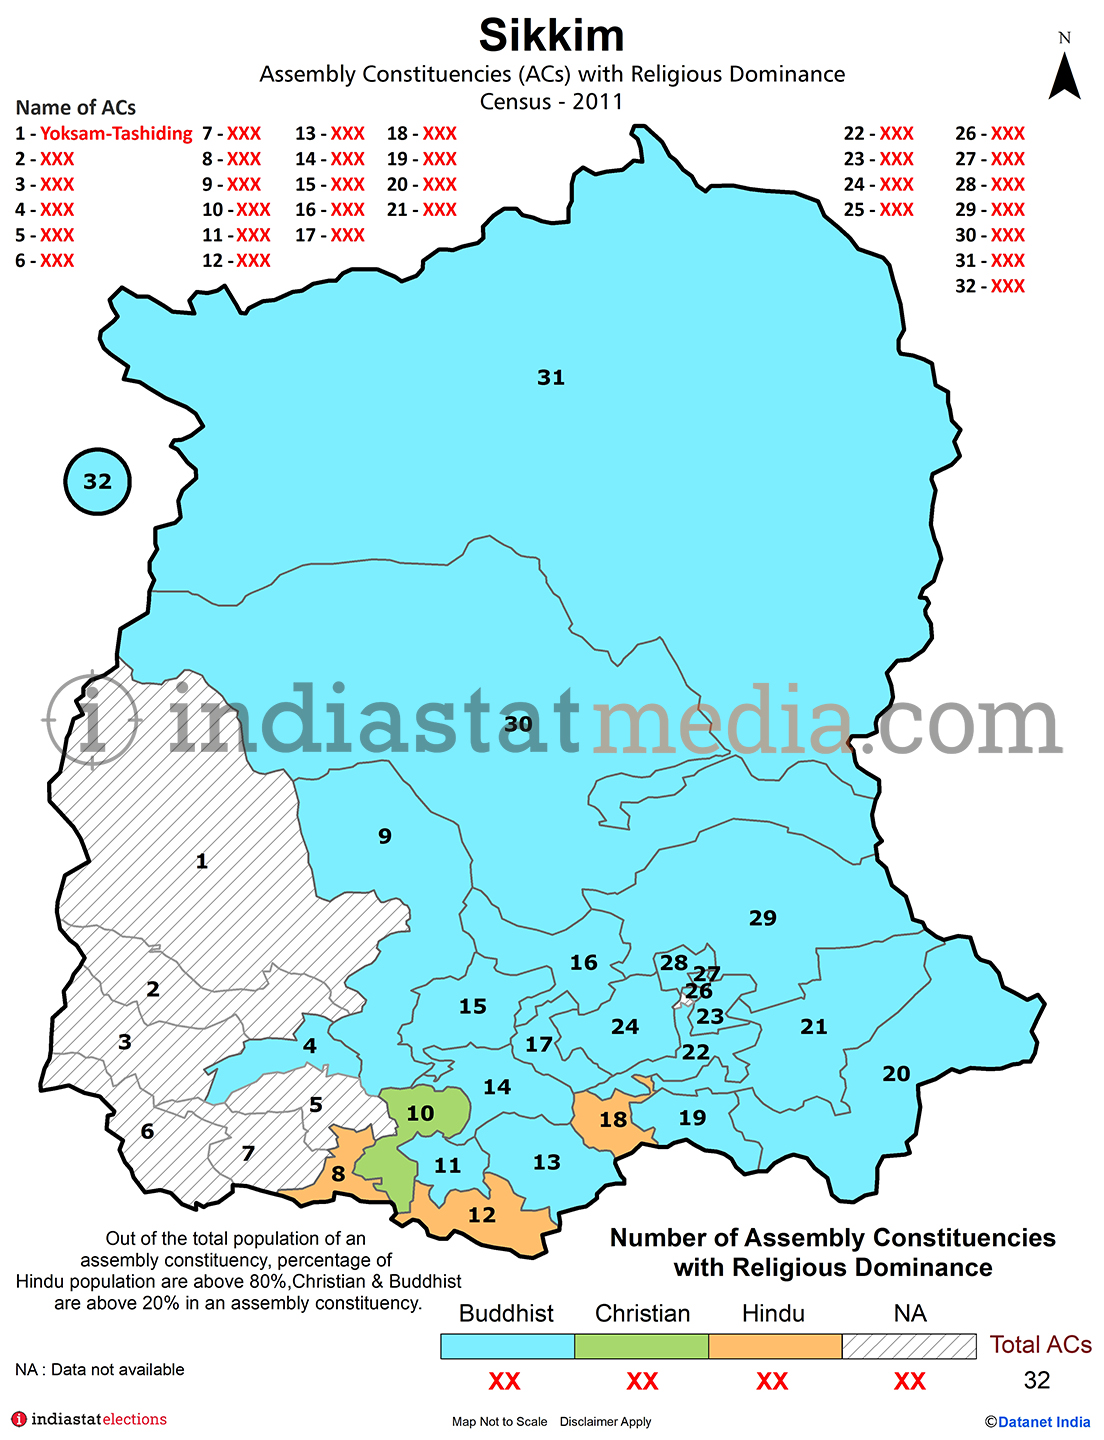 Assembly Constituencies (ACs) with Religious Dominance in Sikkim - Census 2011